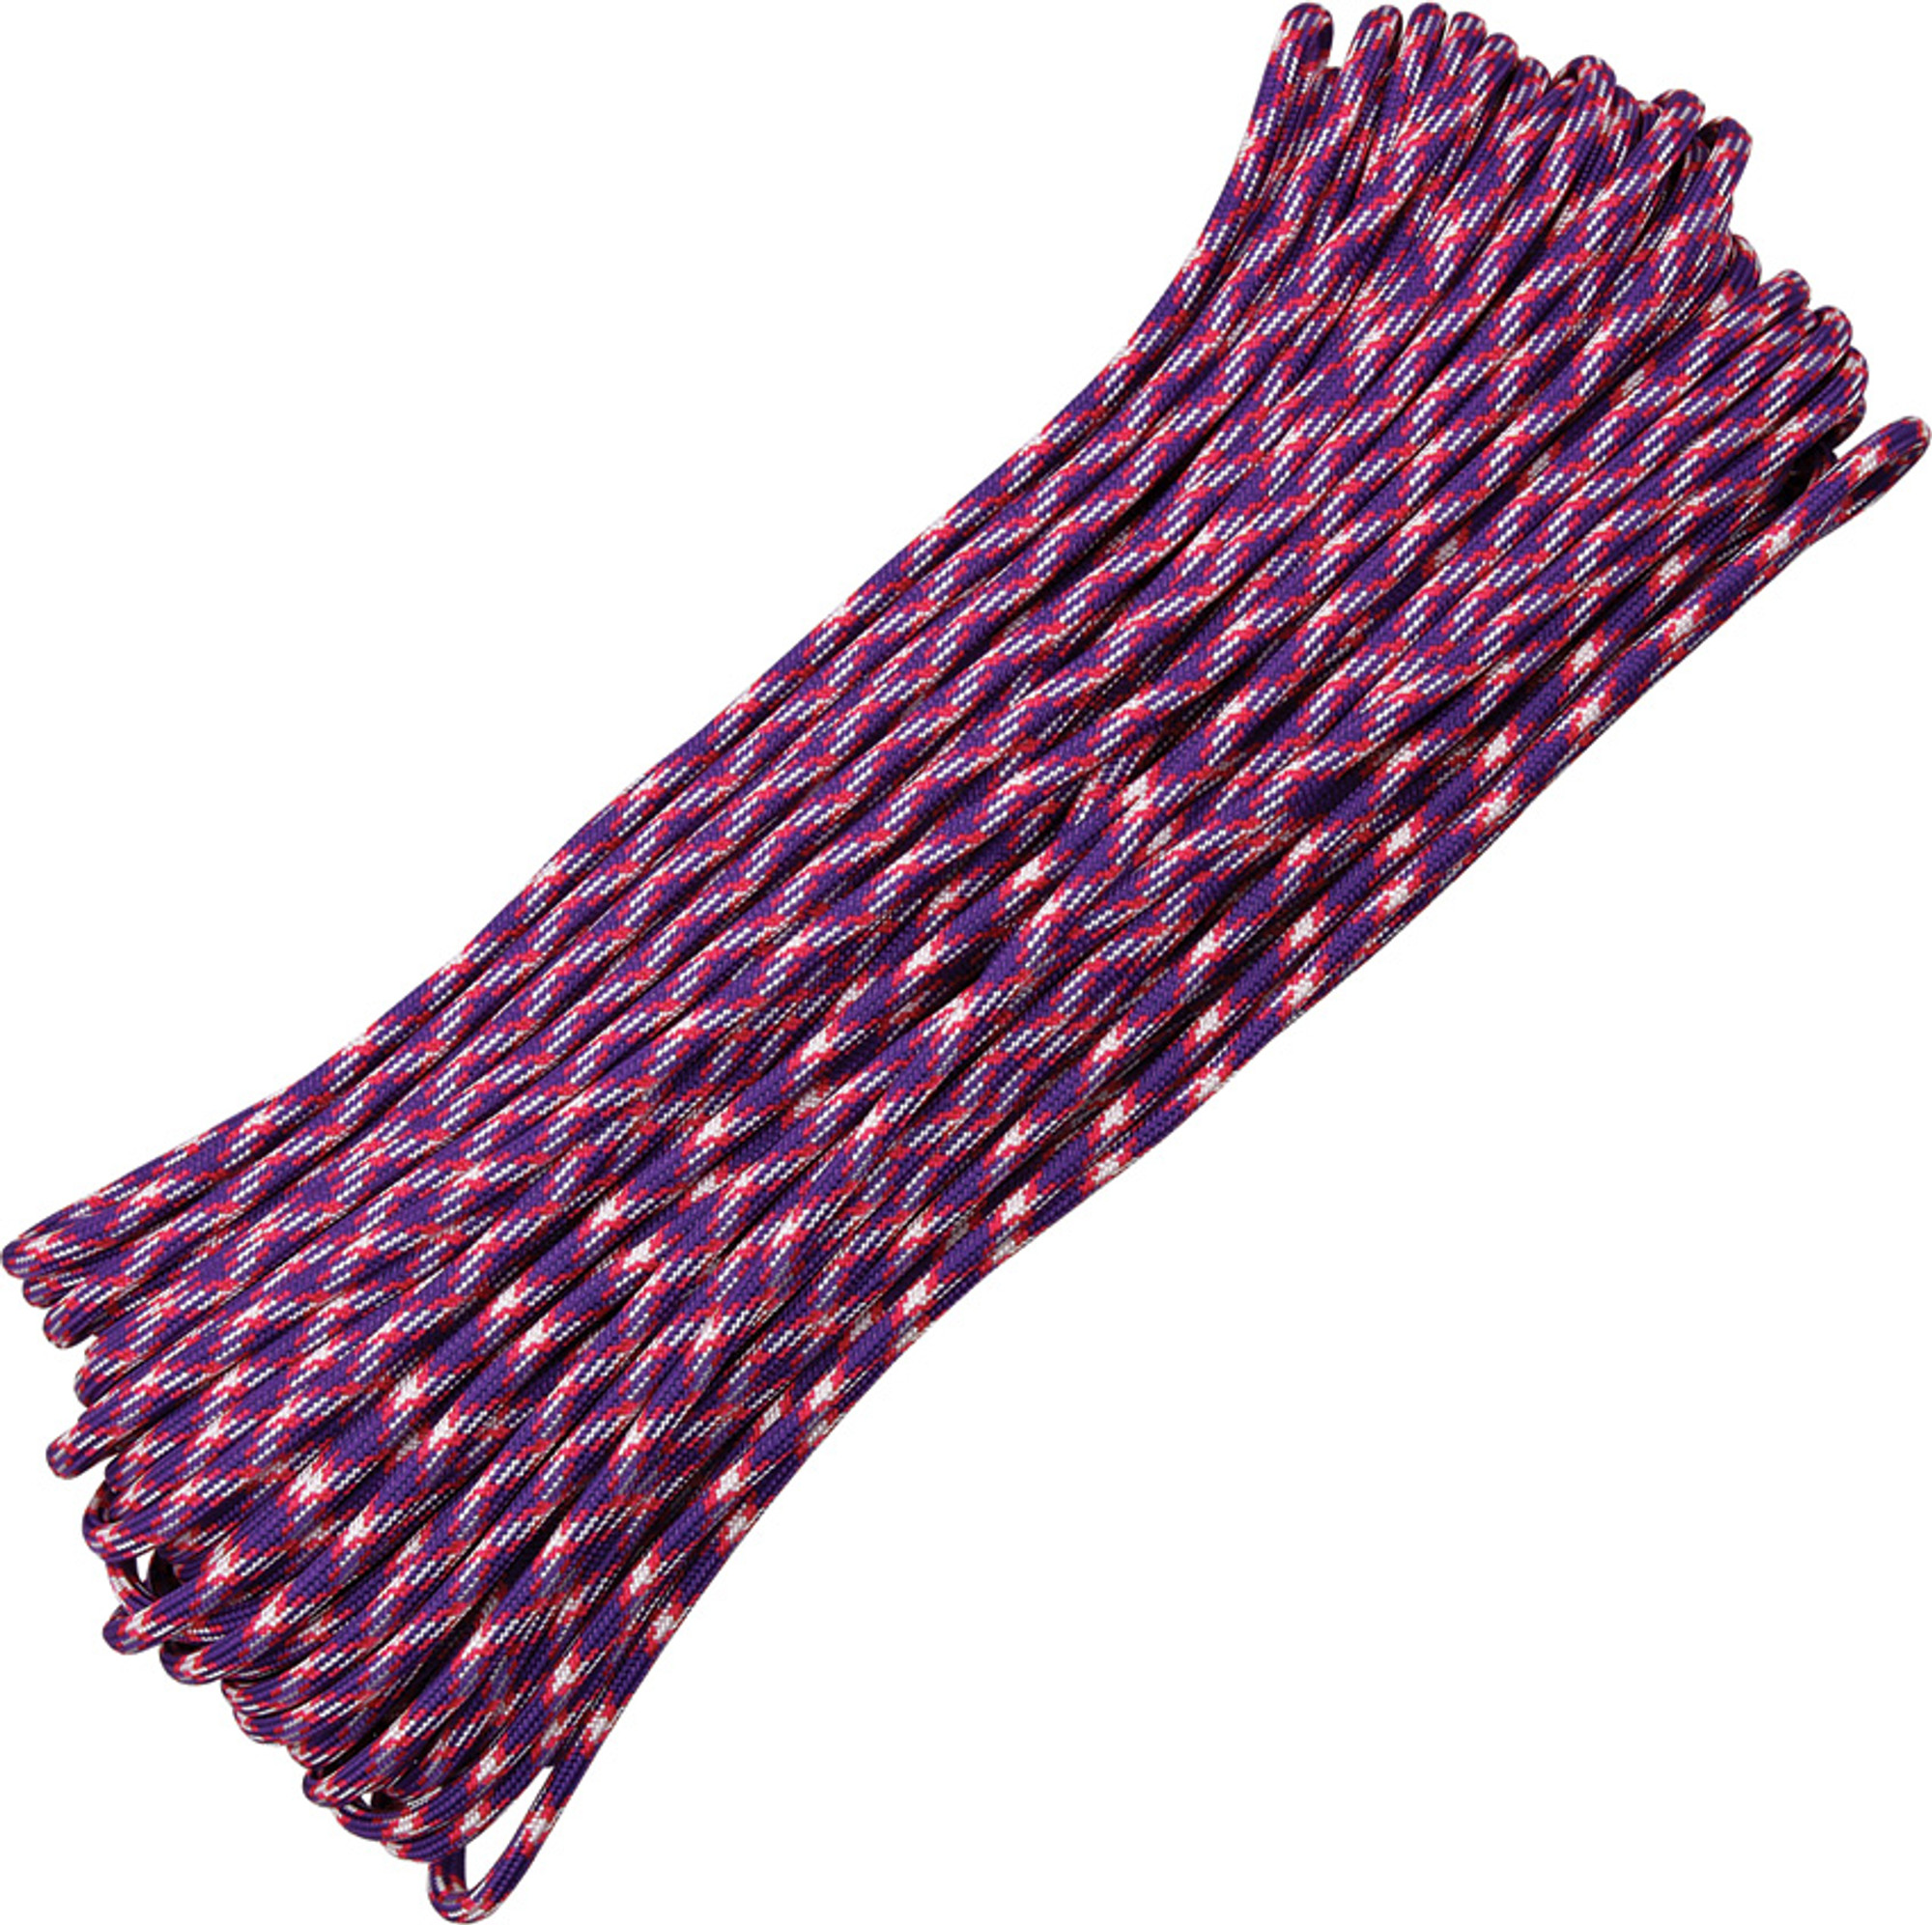 550 Paracord, 100Ft. - Purplelicious